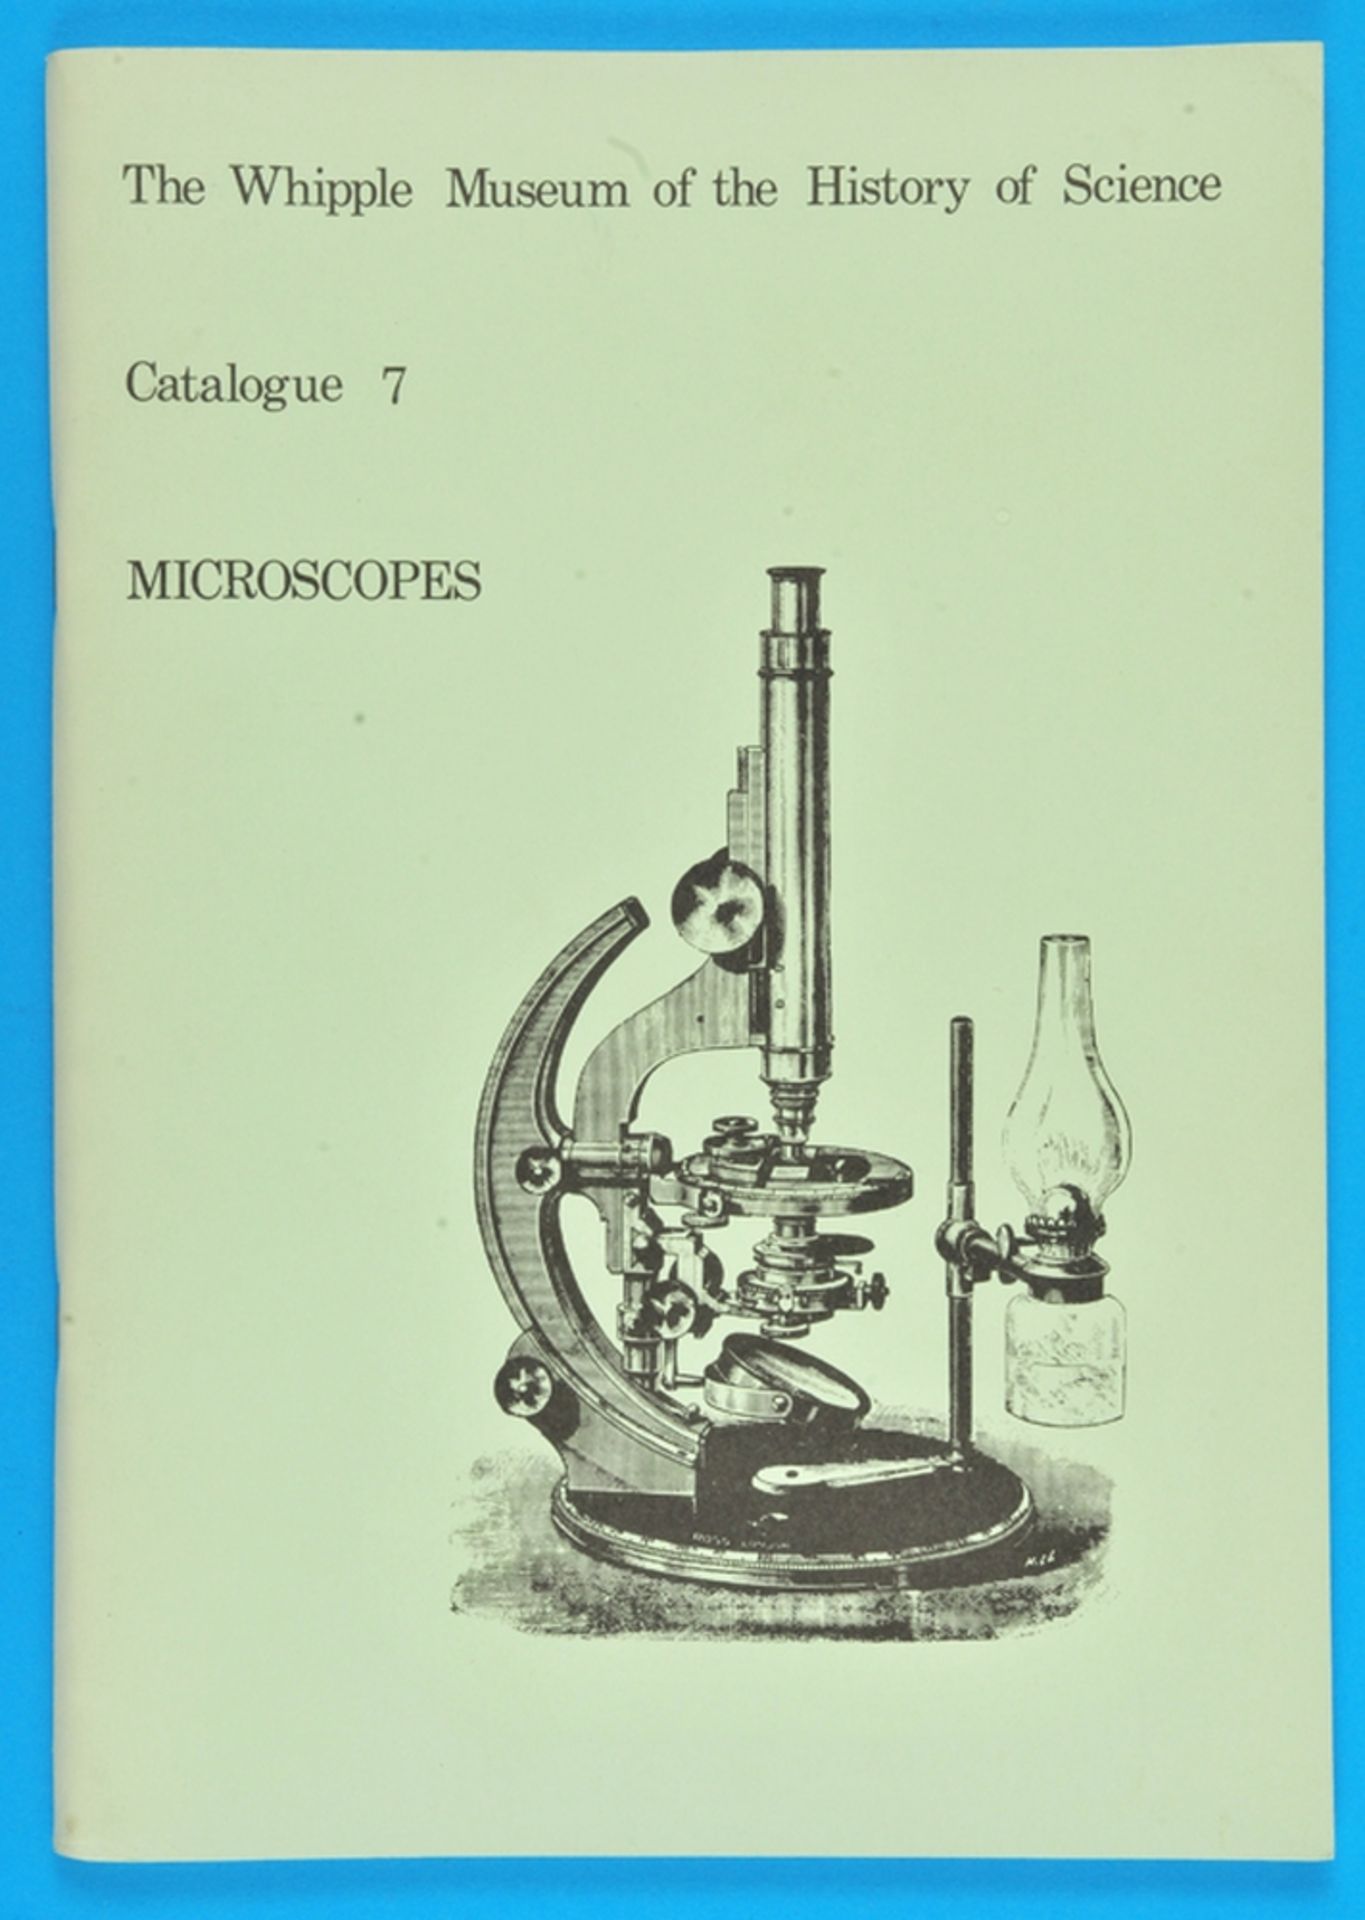 The Wipple Museum of the Hostory of Science, Catalogue 7, Microscopes